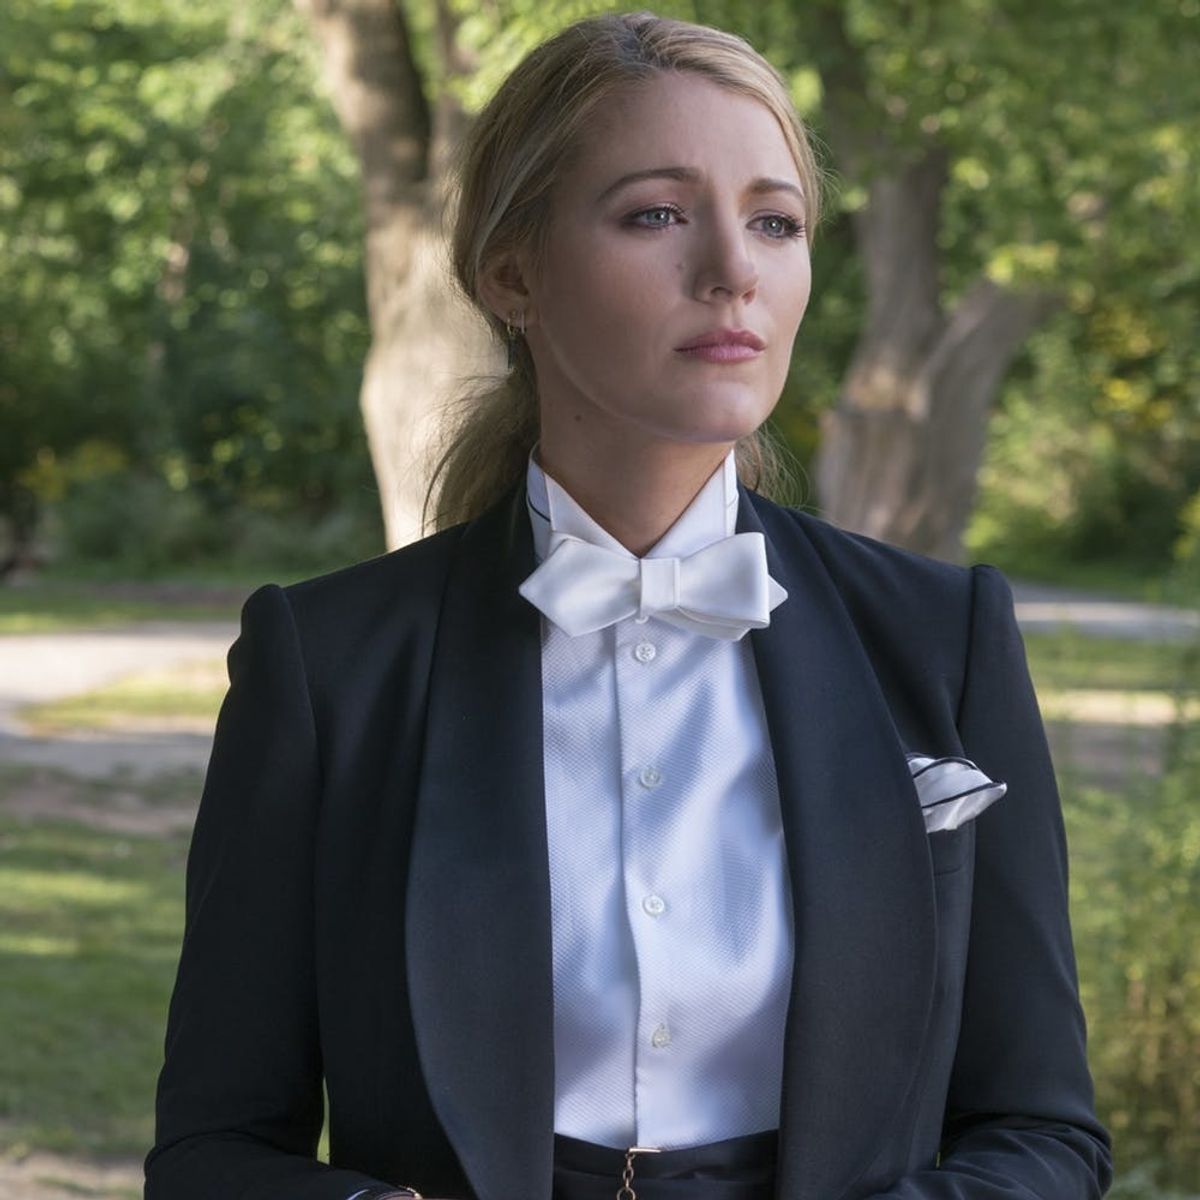 Blake Lively Goes Missing in the Mysterious ‘A Simple Favor’ Trailer